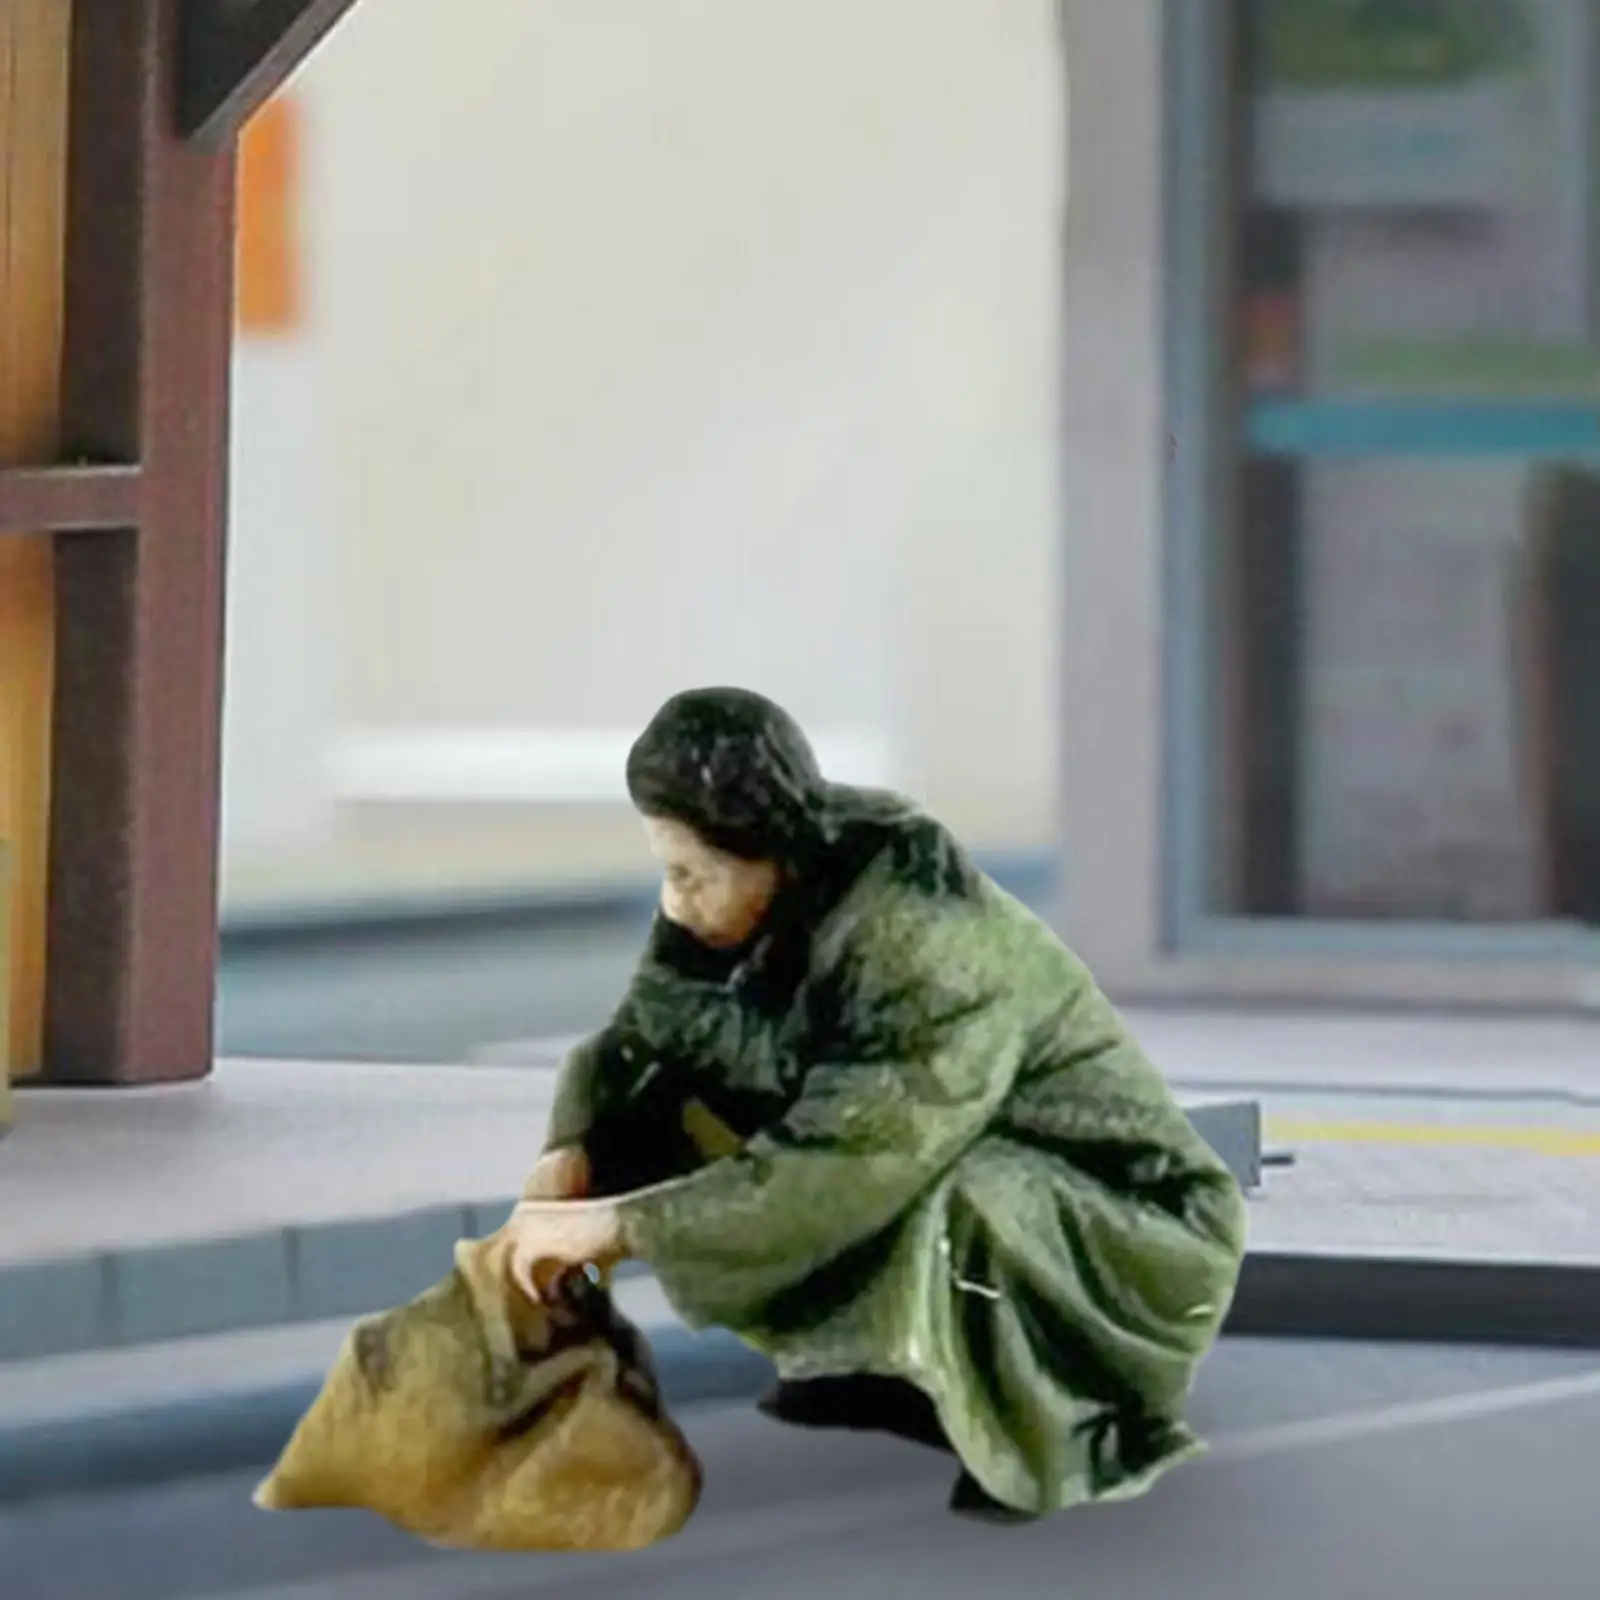 1/87 Resin Model Figure wearing Green Coat Sand Table Ornament Collection People Figurines for Miniature Scene Decor Accessories